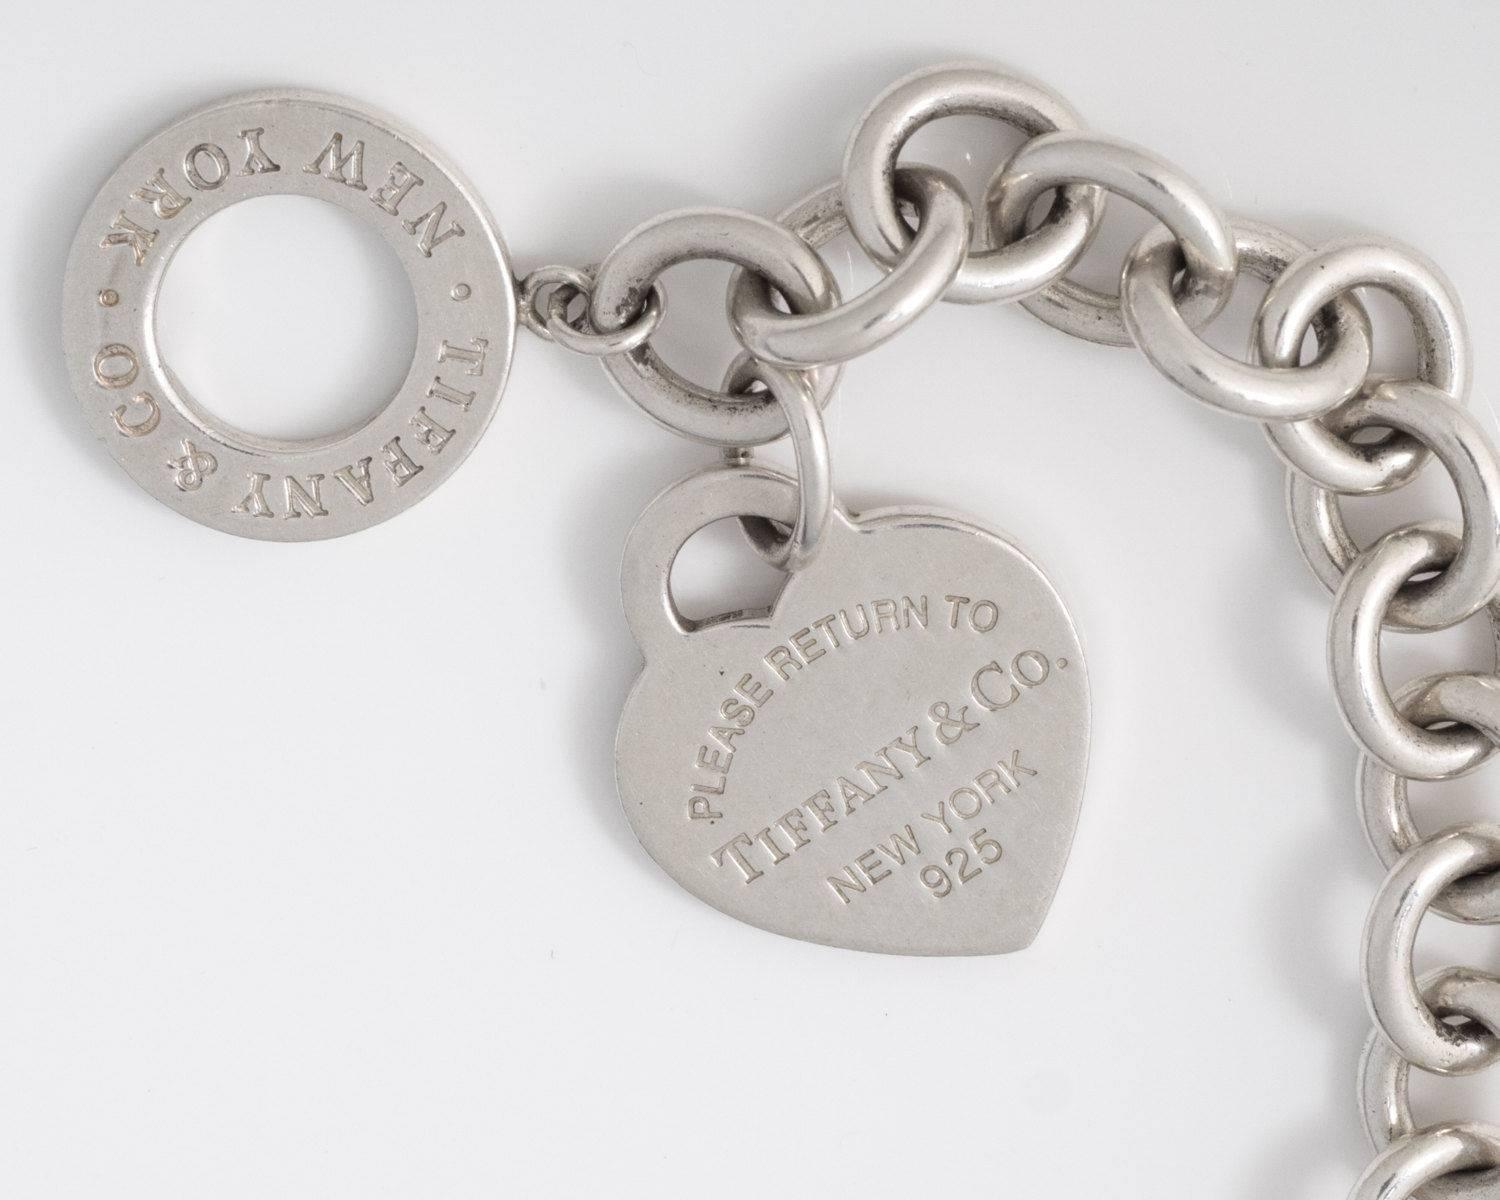 Tiffany and Co. Return to Tiffany Heart Toggle Bracelet - Sterling Silver

Features Sterling Silver open links, a Heart Tag Charm and a Toggle Clasp. This beautiful Tiffany and Co. classic bracelet looks gorgeous worn alone, with a watch or layered